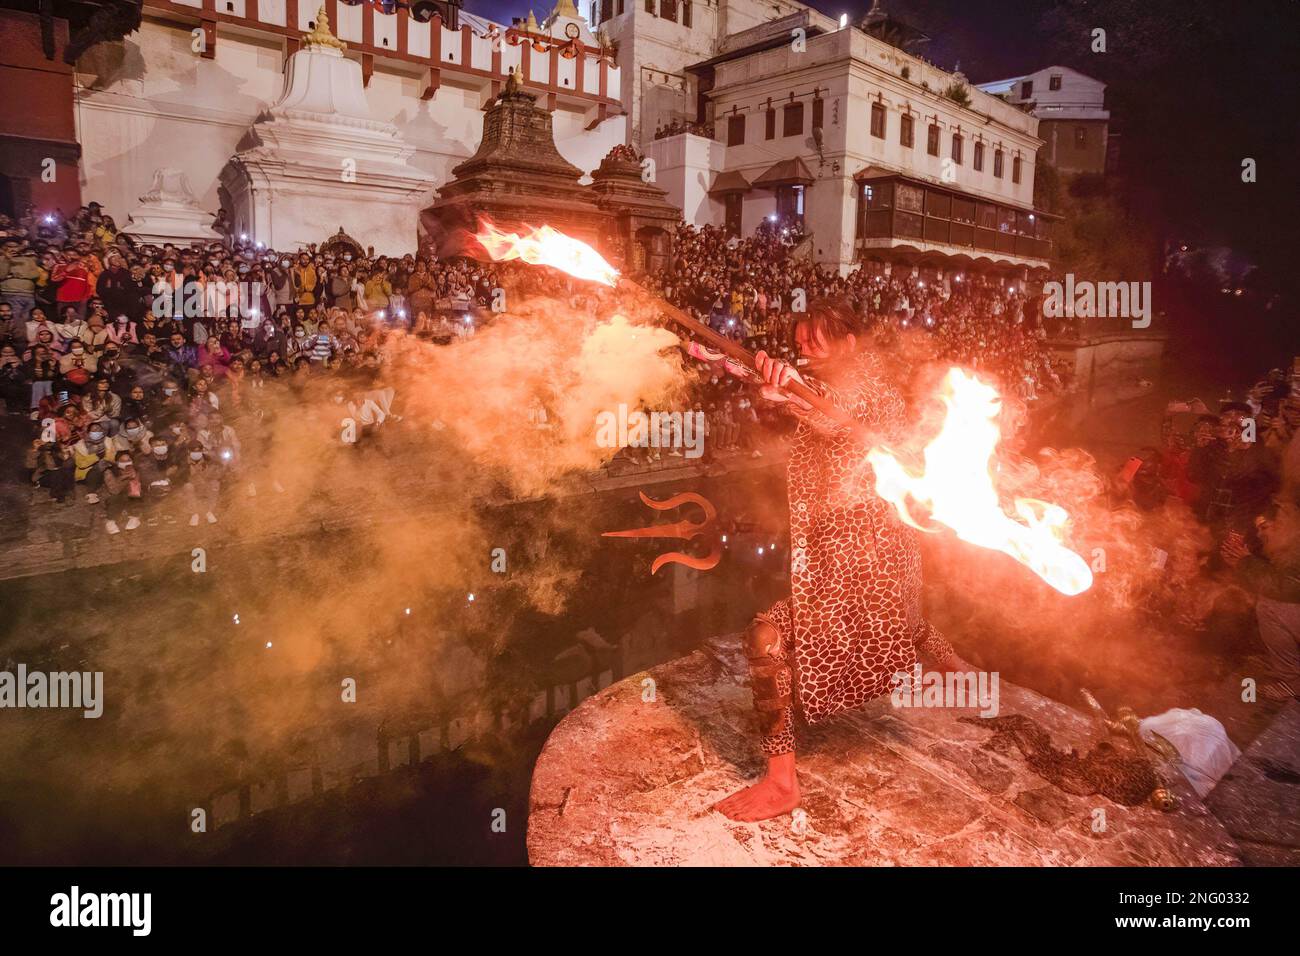 A Hindu holy man, or Sadhu, the follower of Lord Shiva, throws ashes as he performs Tandava, a divine dance performed by Deity Shiva, a source of creation, dissolution, and preservation on the eve of the Maha Shivaratri festival at the premises of Pashupatinath Temple in Kathmandu. Hindu Devotees from Nepal and India come to this temple to take part in the Shivaratri festival which is one of the biggest Hindu festivals dedicated to Lord Shiva and celebrated by devotees all over the world. (Photo by Prabin Ranabhat/SOPA Images/Sipa USA) Stock Photo